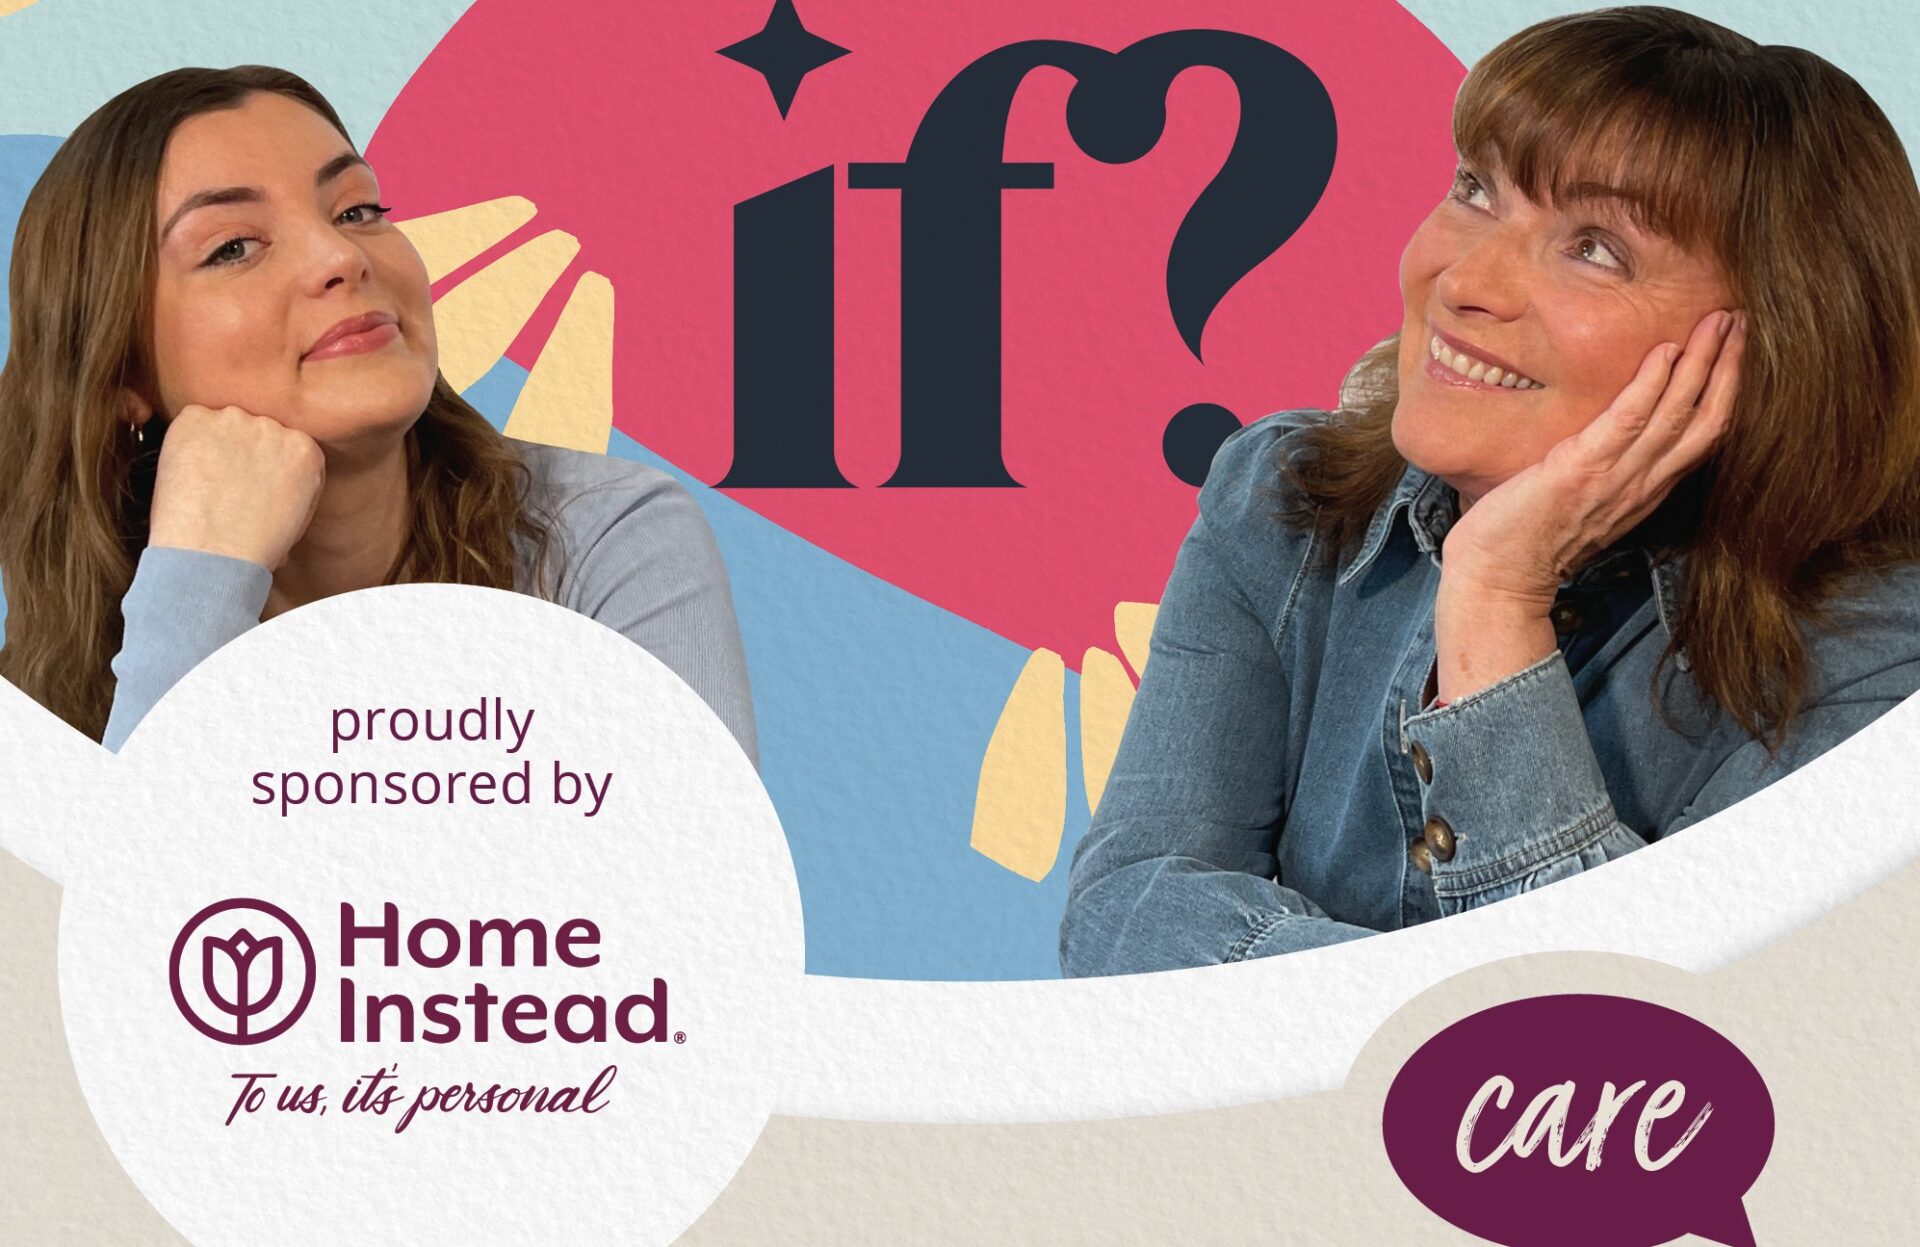 Lorraine Kelly joins forces with Home Instead